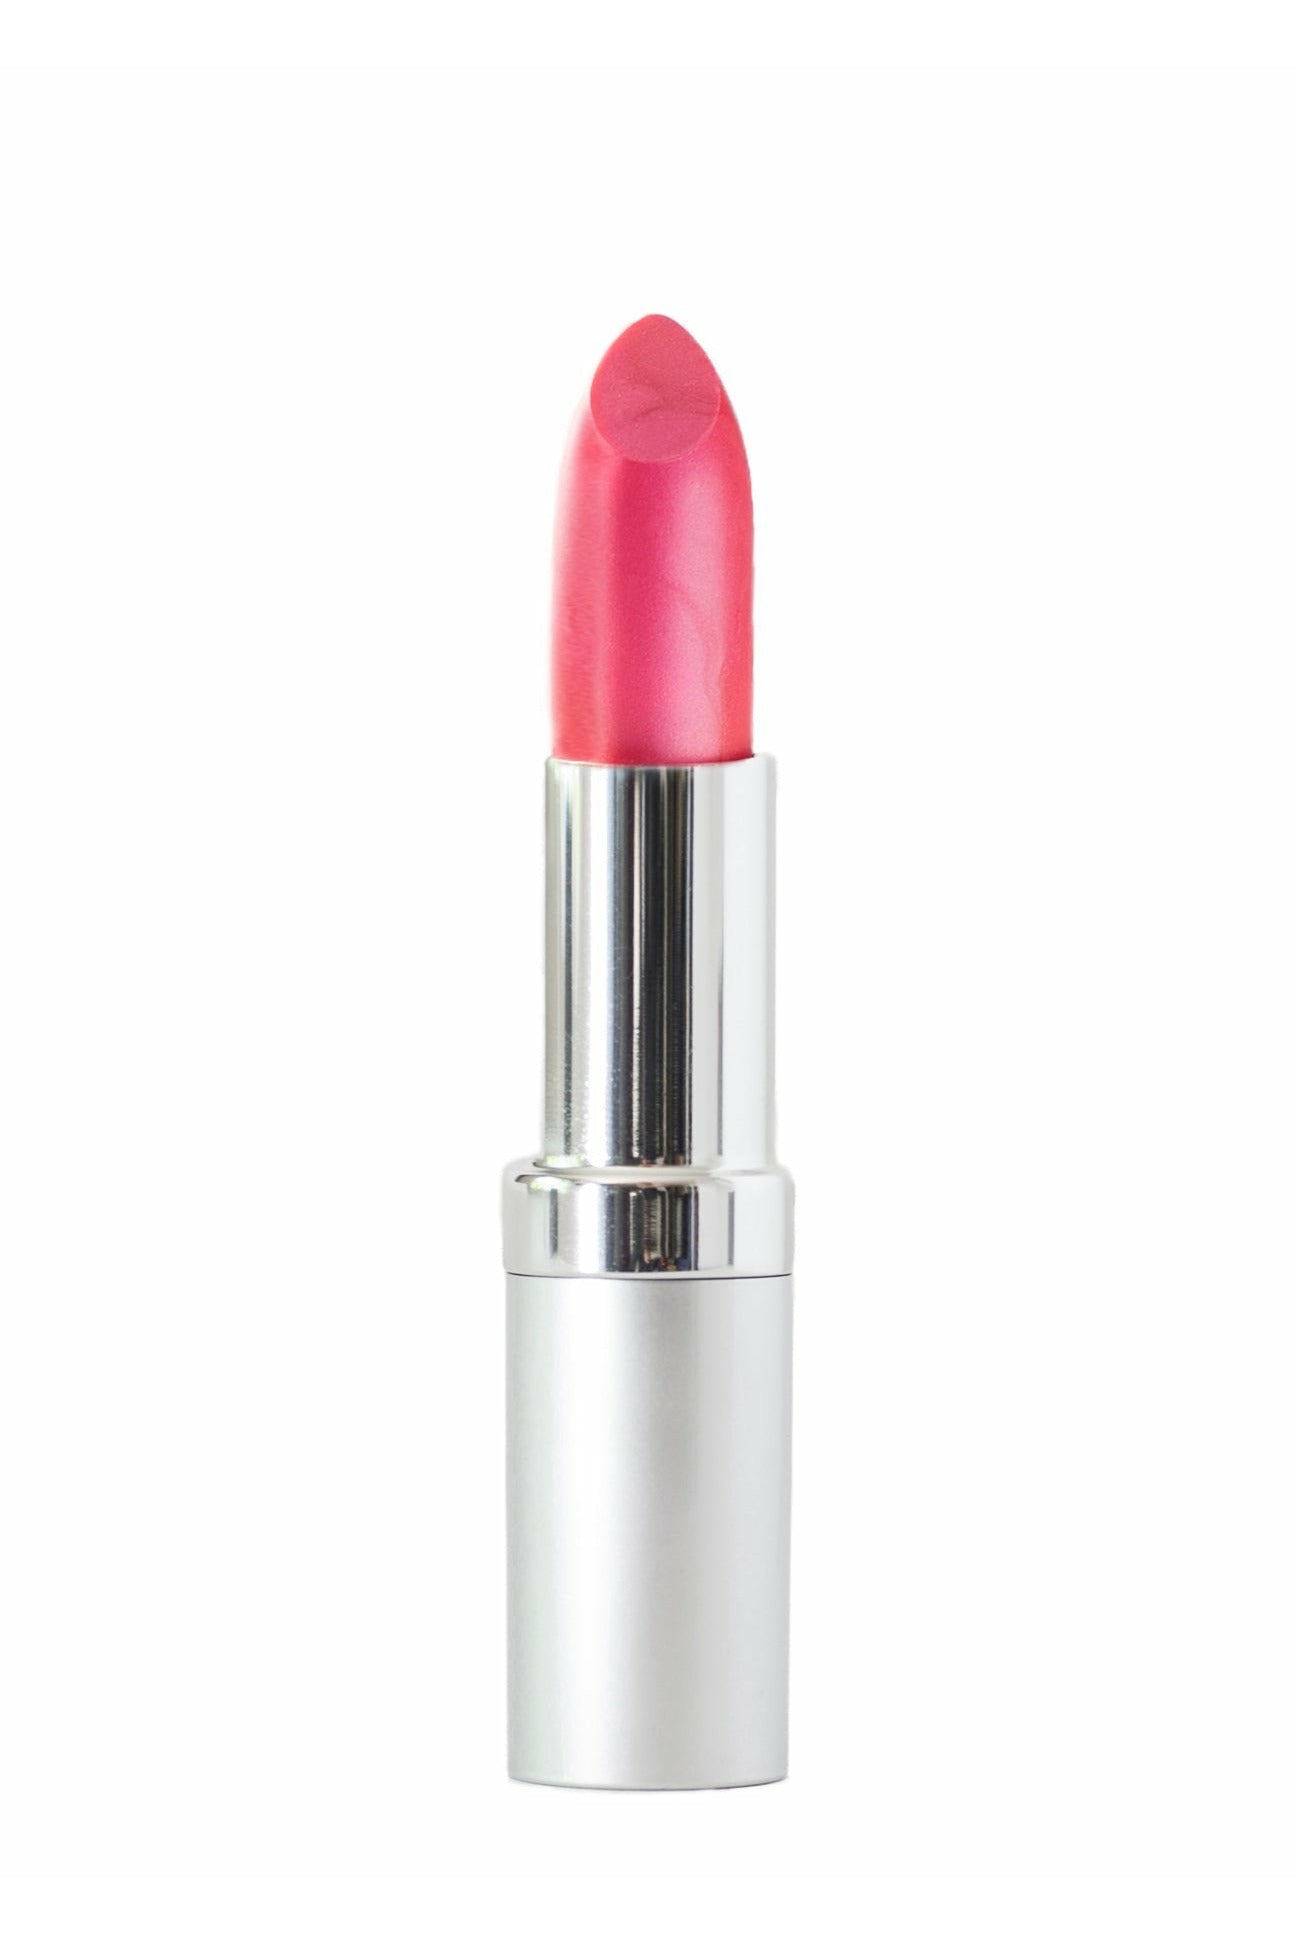 REB Cosmetics Lipstick in Pink Envy